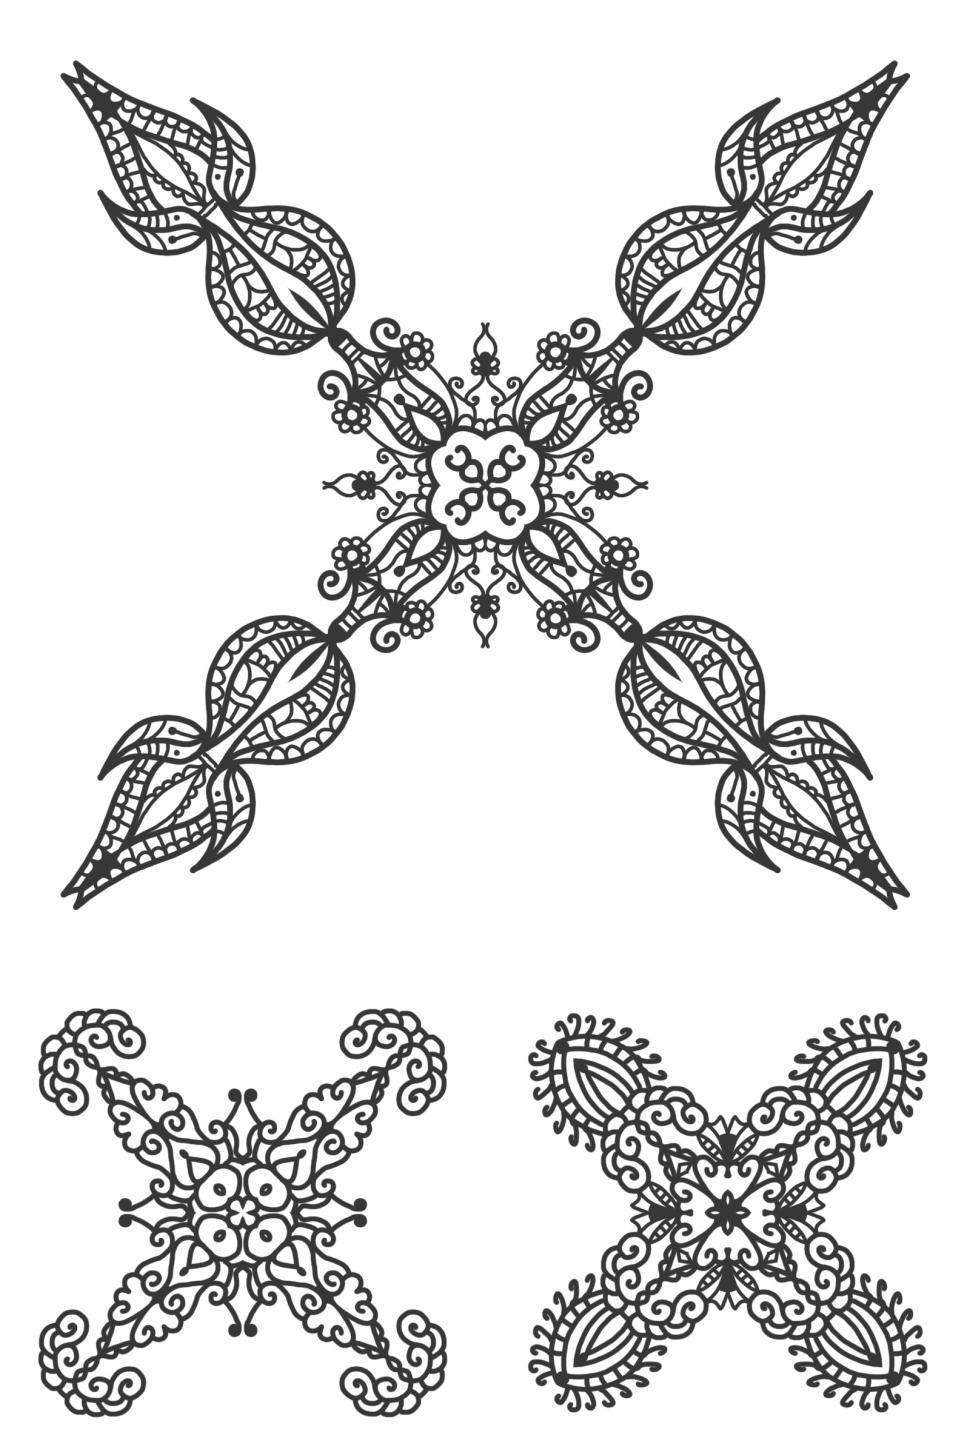 Free Image of Doodle Ornaments  